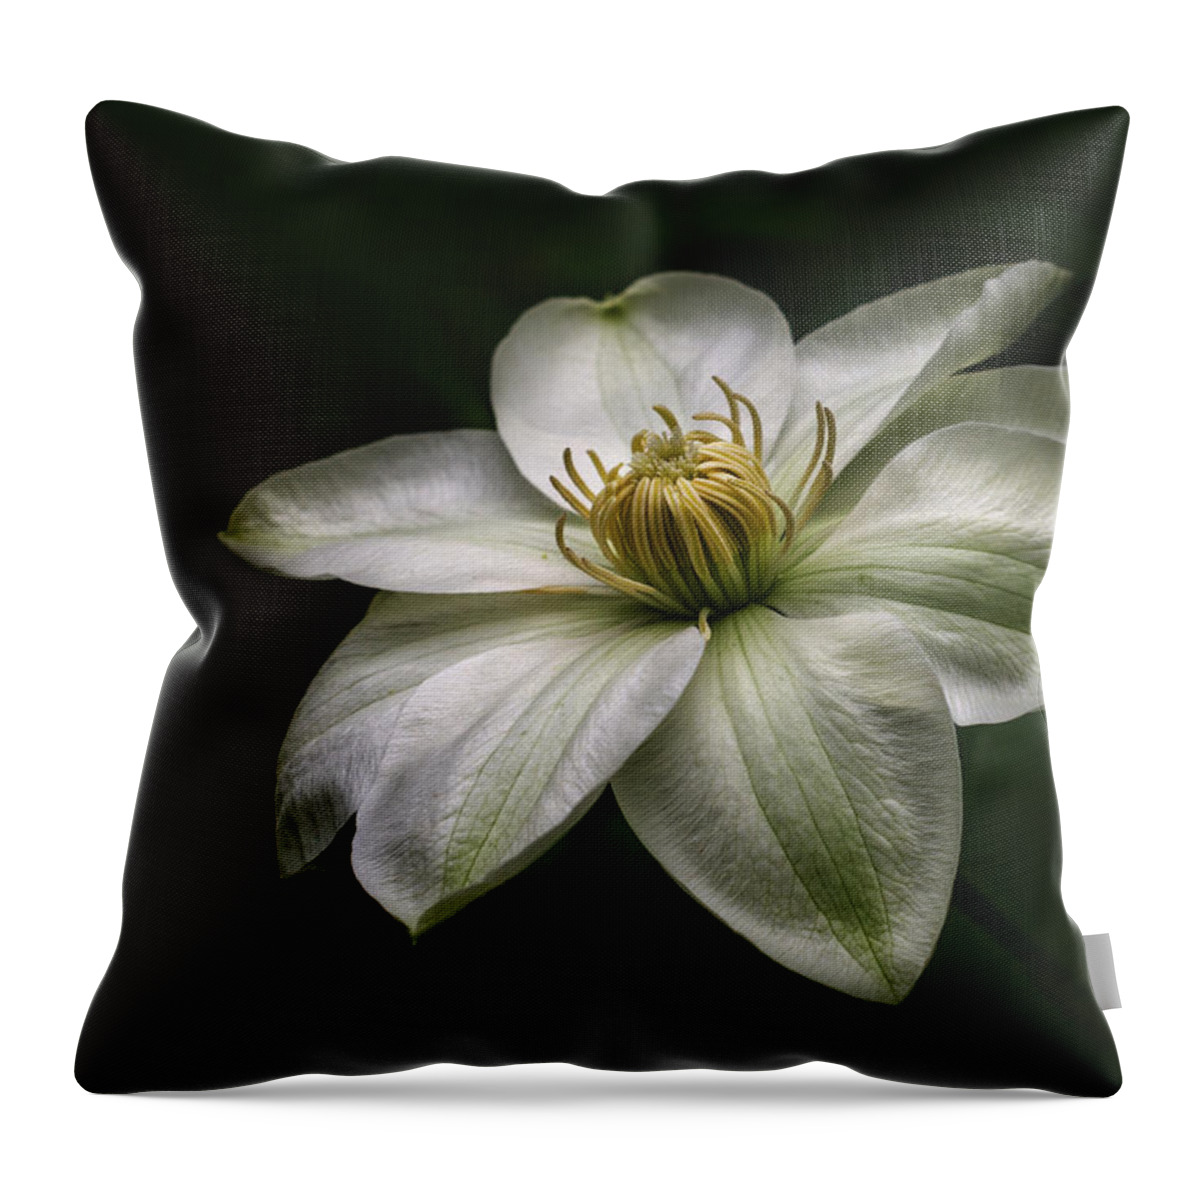  Clematis Throw Pillow featuring the photograph In Bloom by Eleanor Bortnick